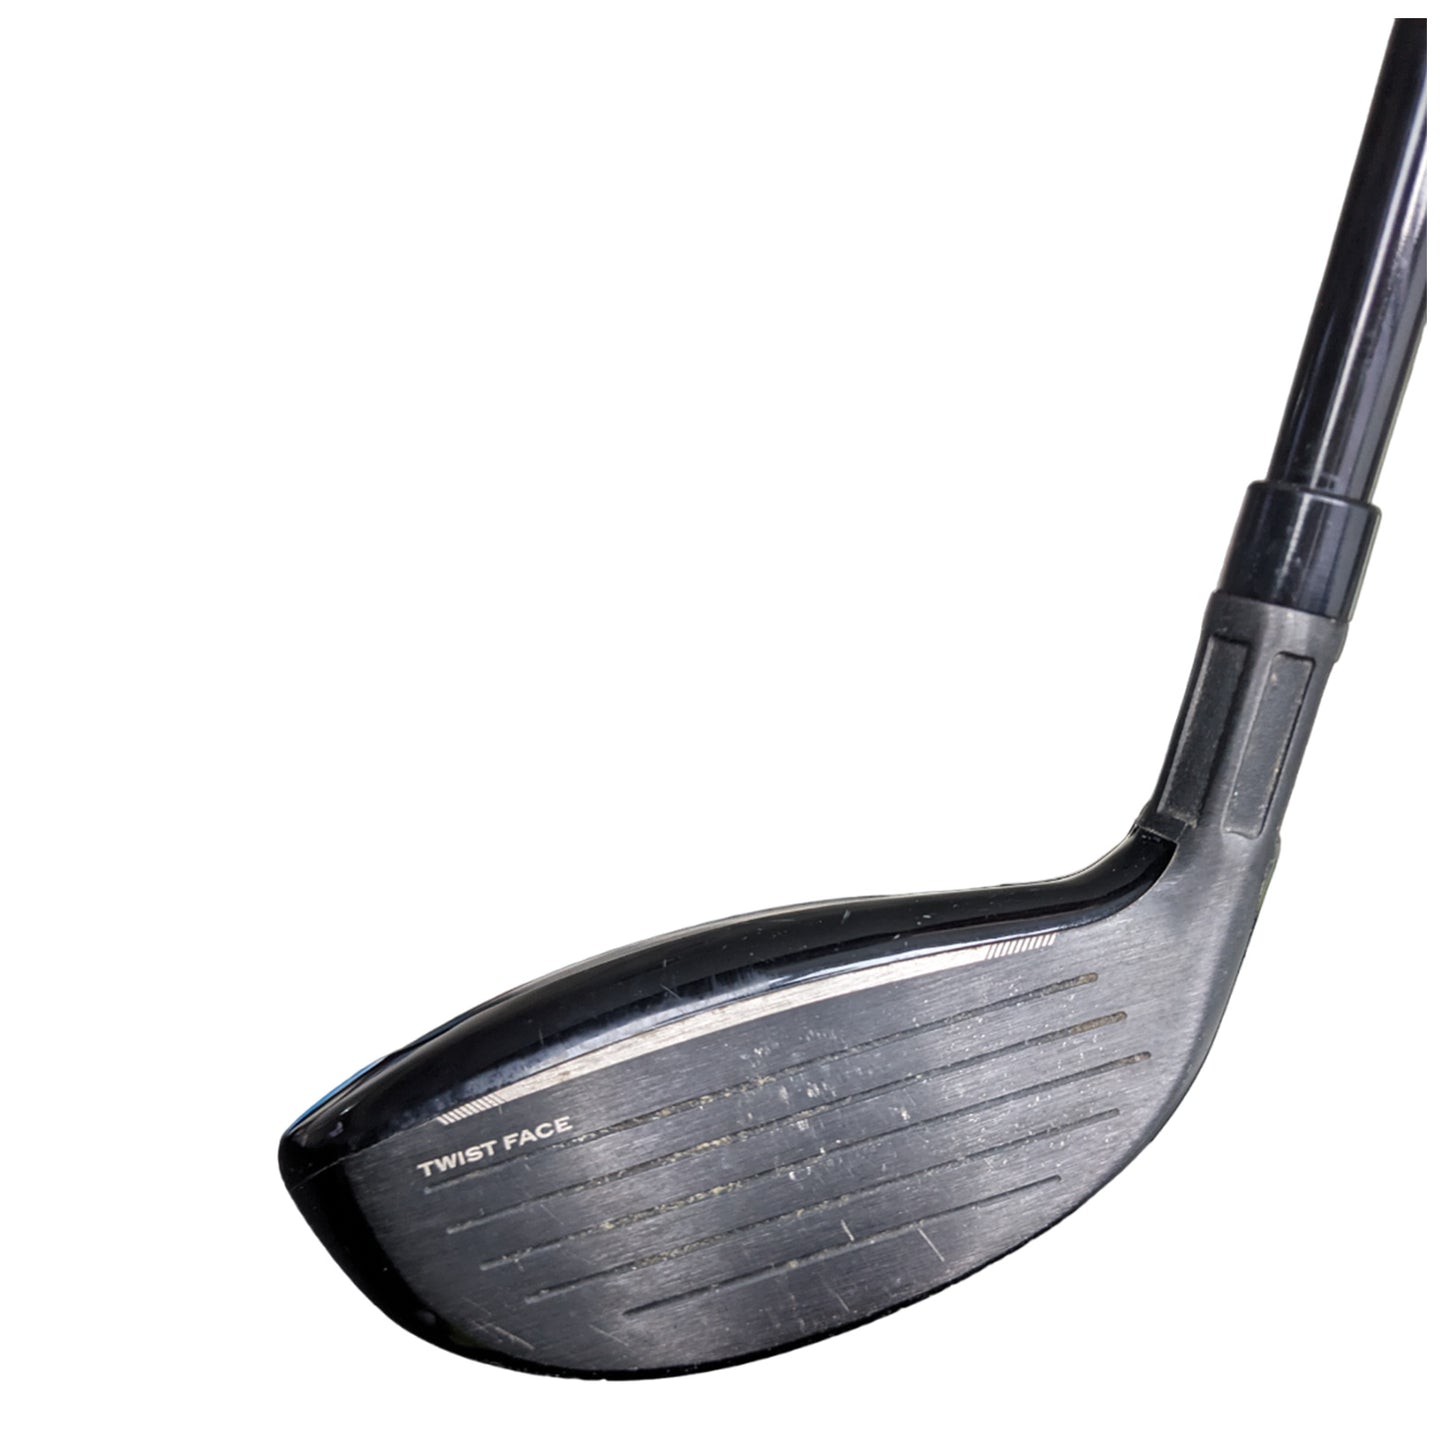 Second Hand TaylorMade Mens Stealth Hybrid